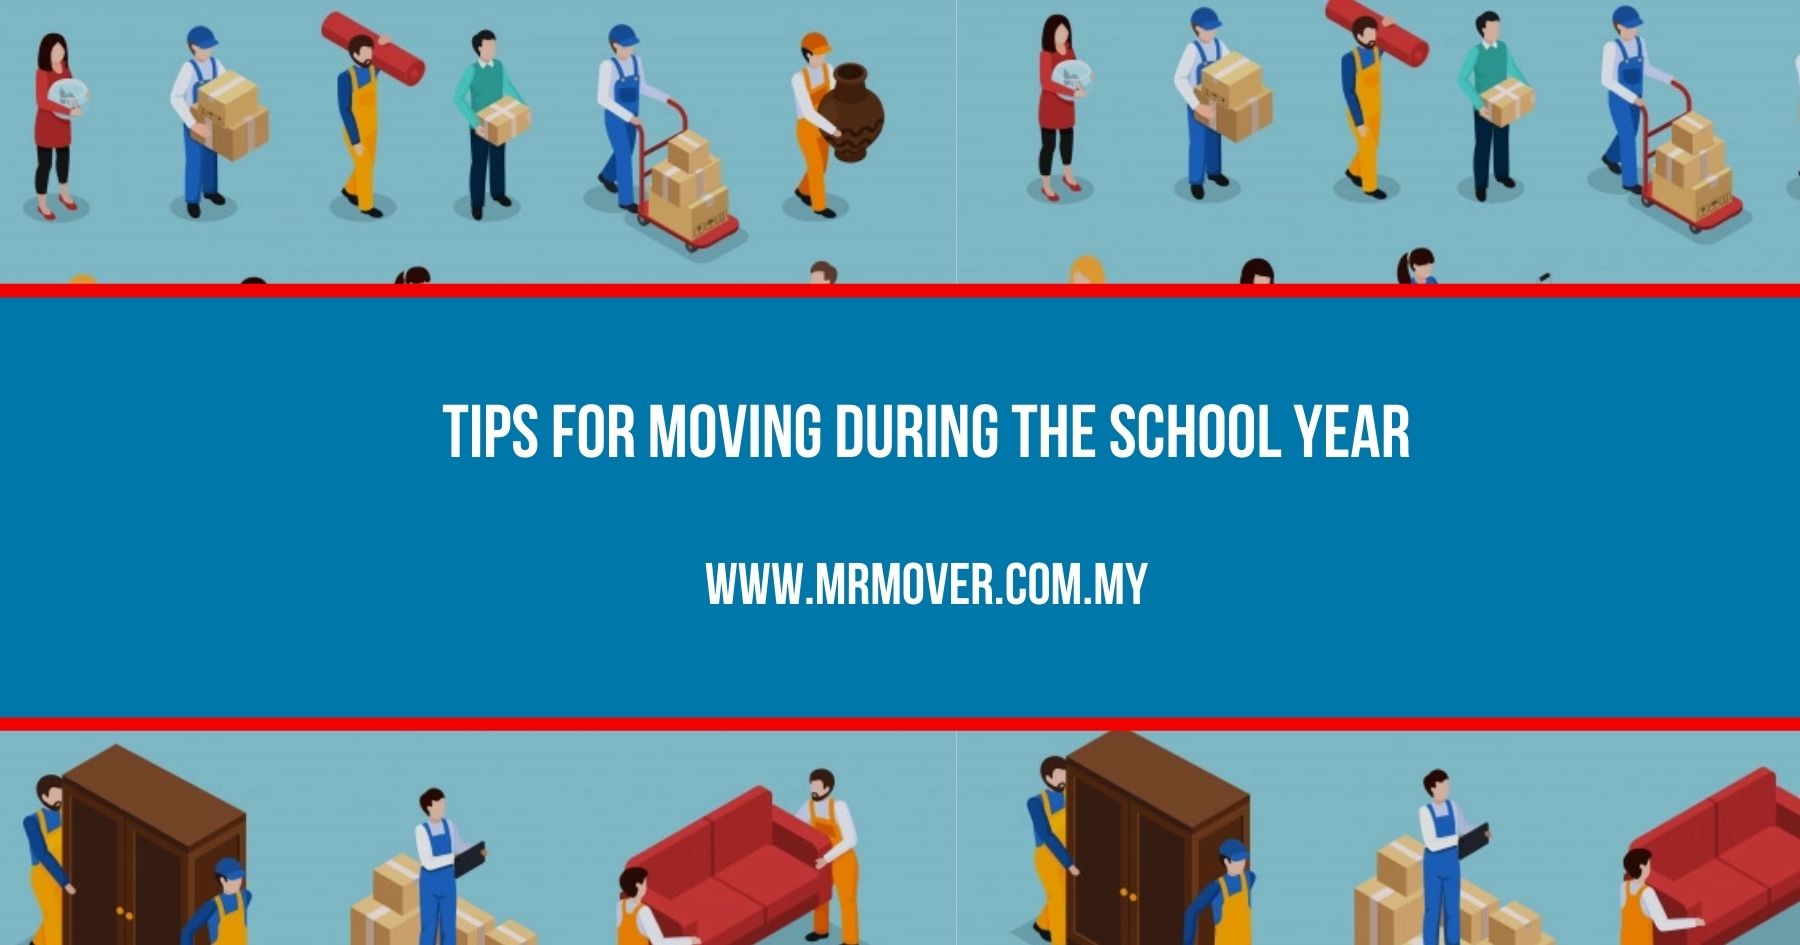 Tips for Moving During the School Year